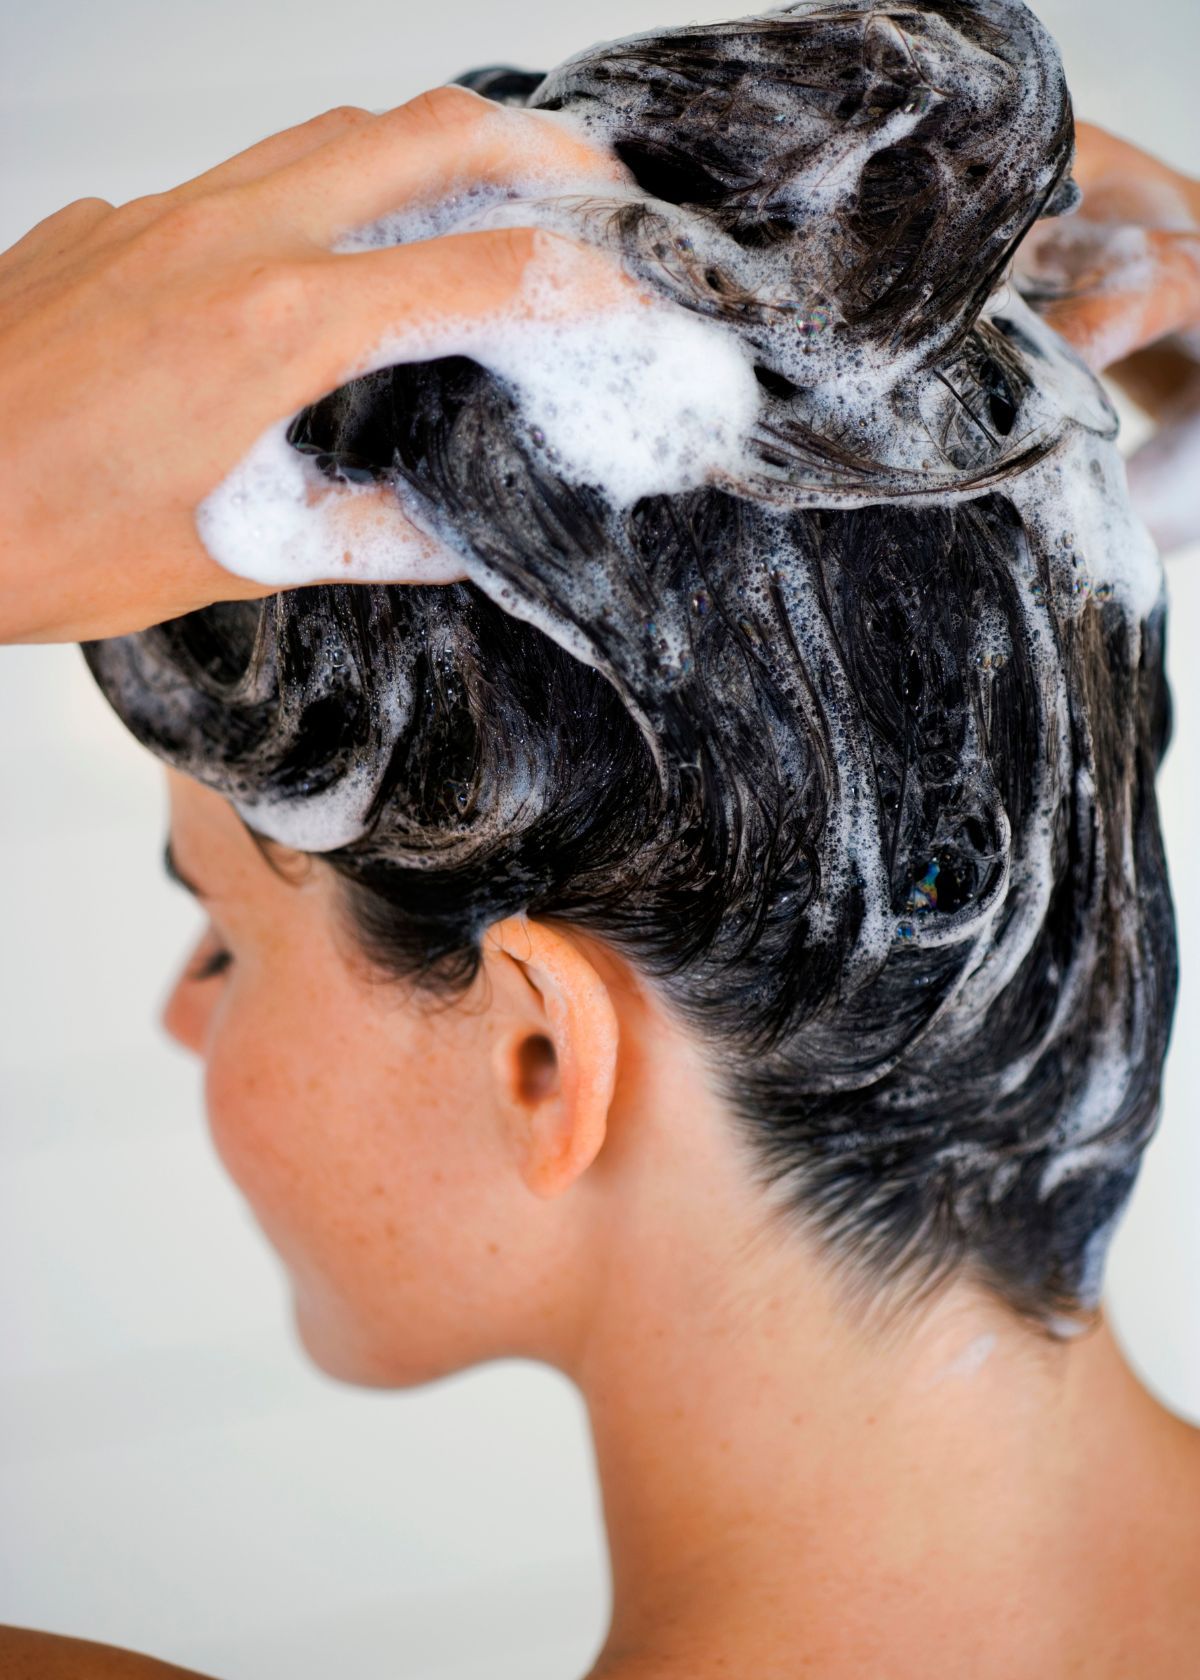 Best Shampoo For Smelly Hair: Top 5 Shampoos (2023)